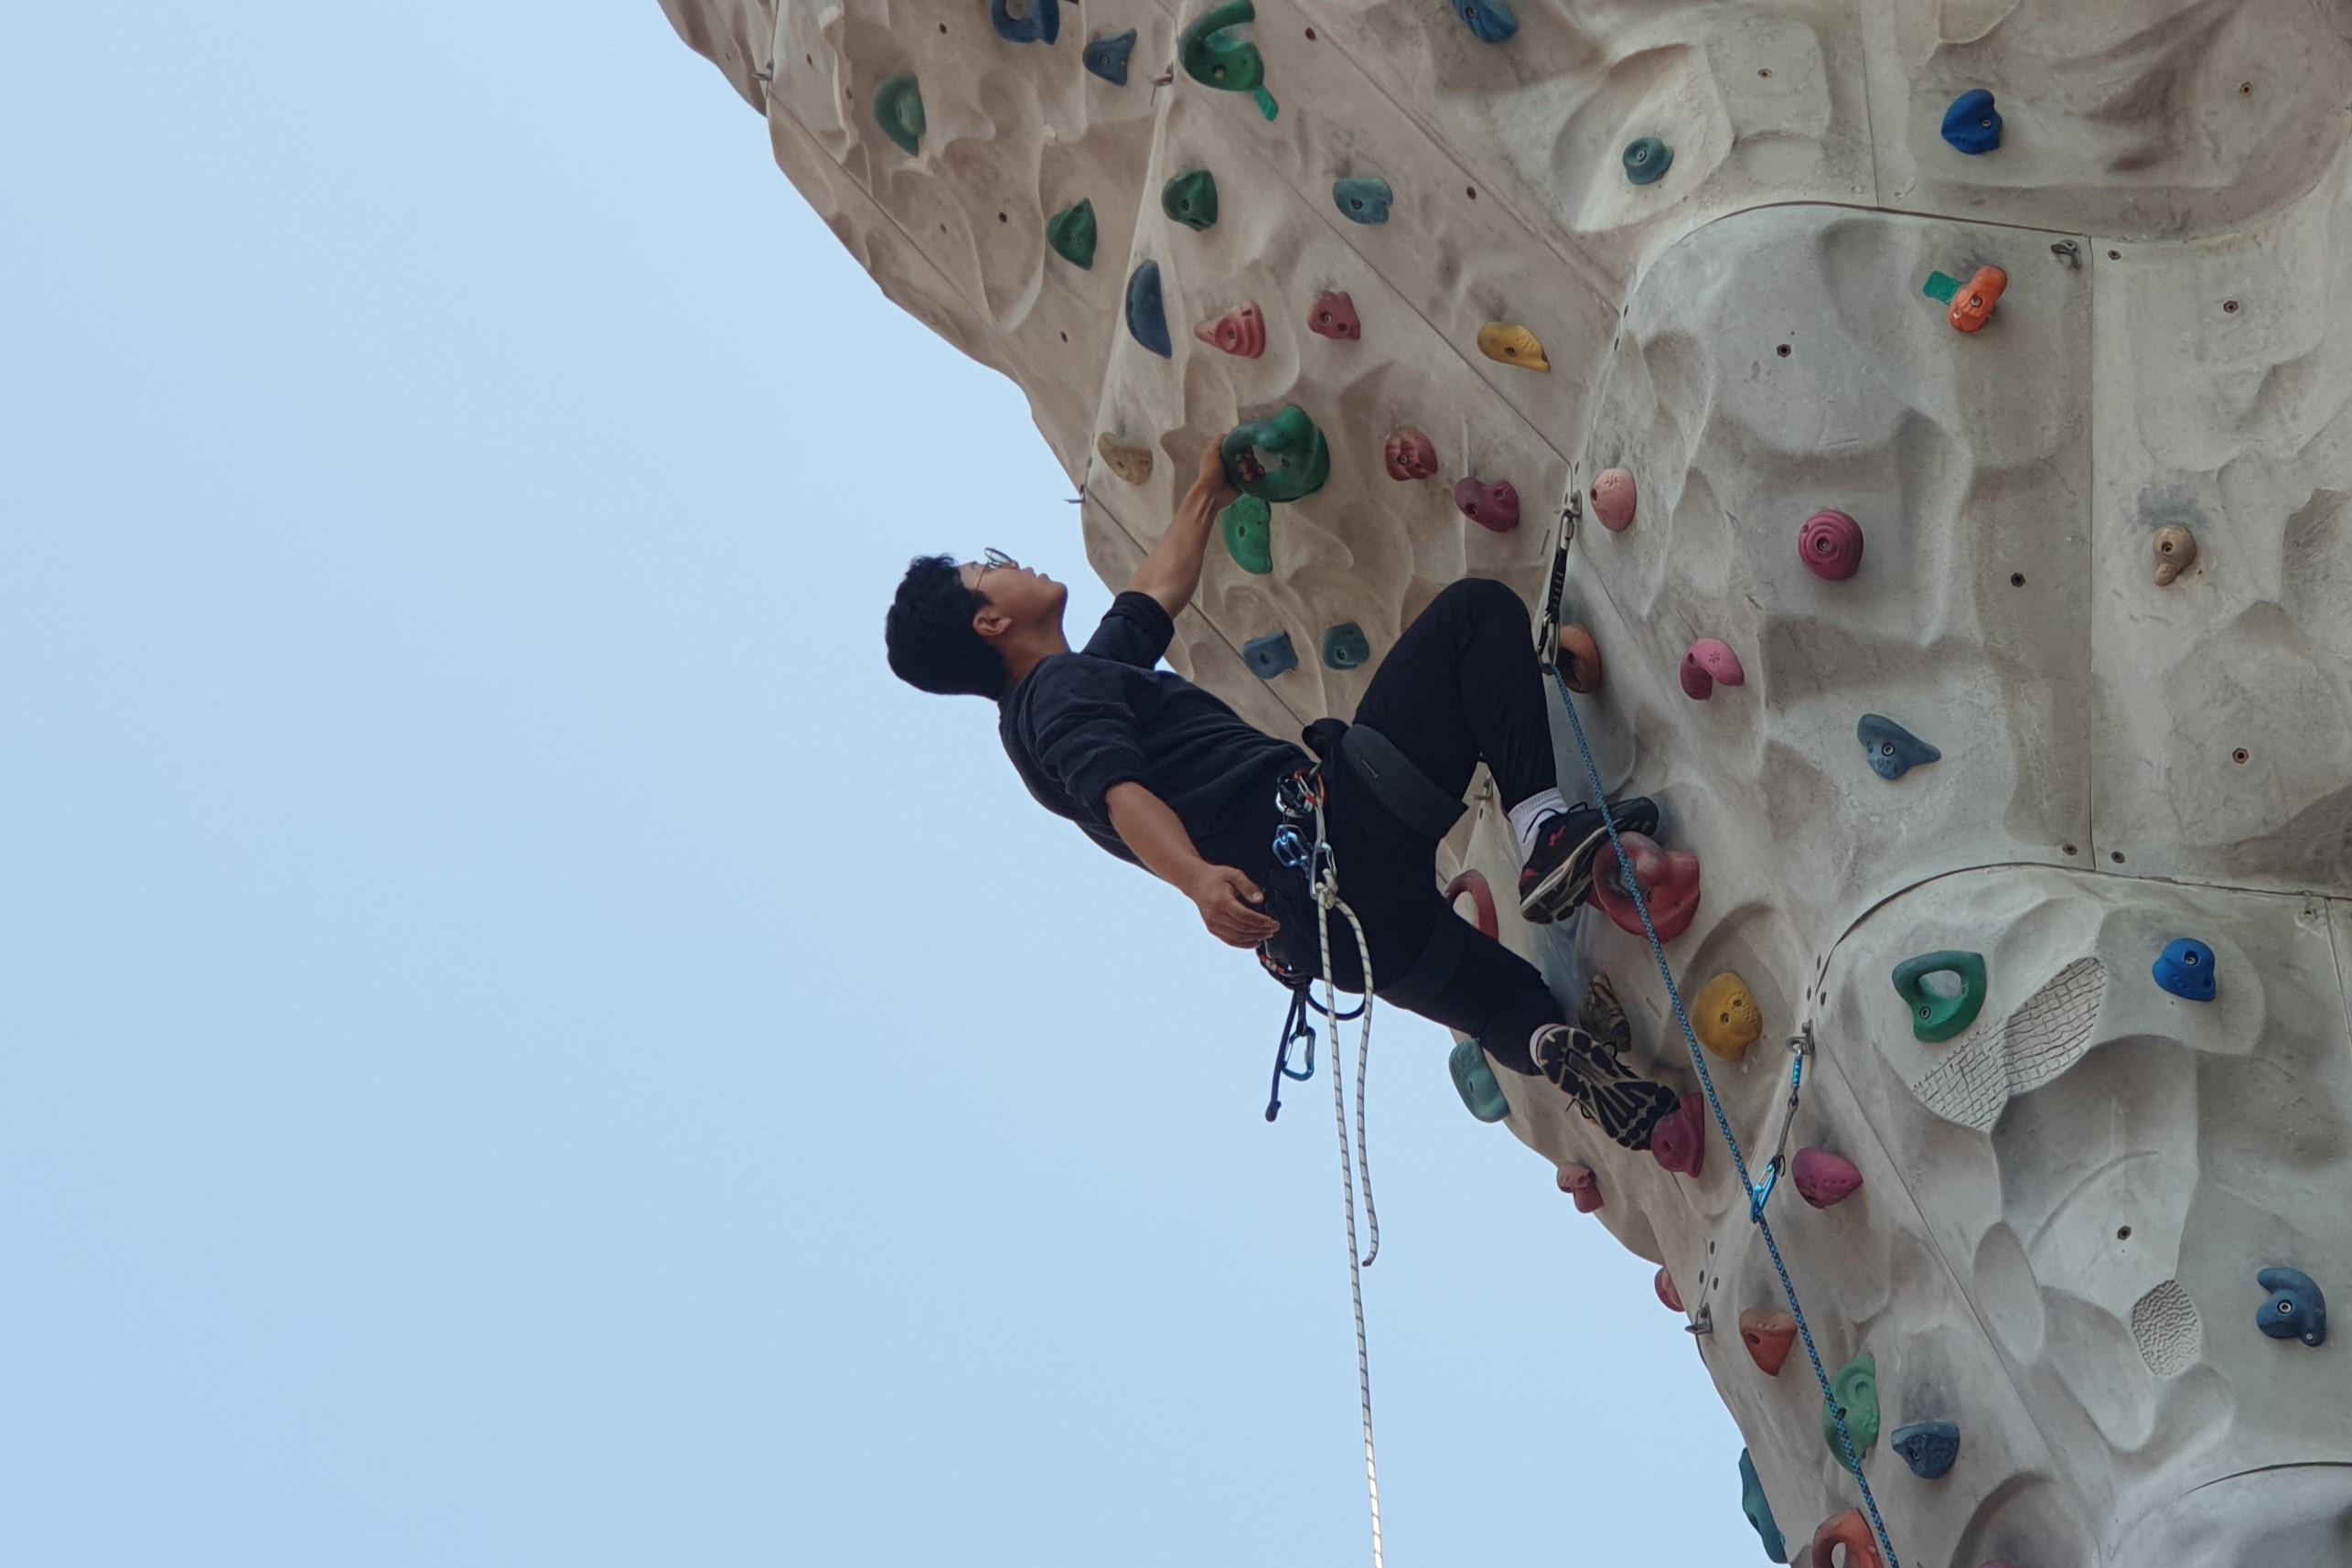 Kim Dong-woo, a student climbing from an artificial rock wall in Incheon National University (Urban Administration, No. 22)